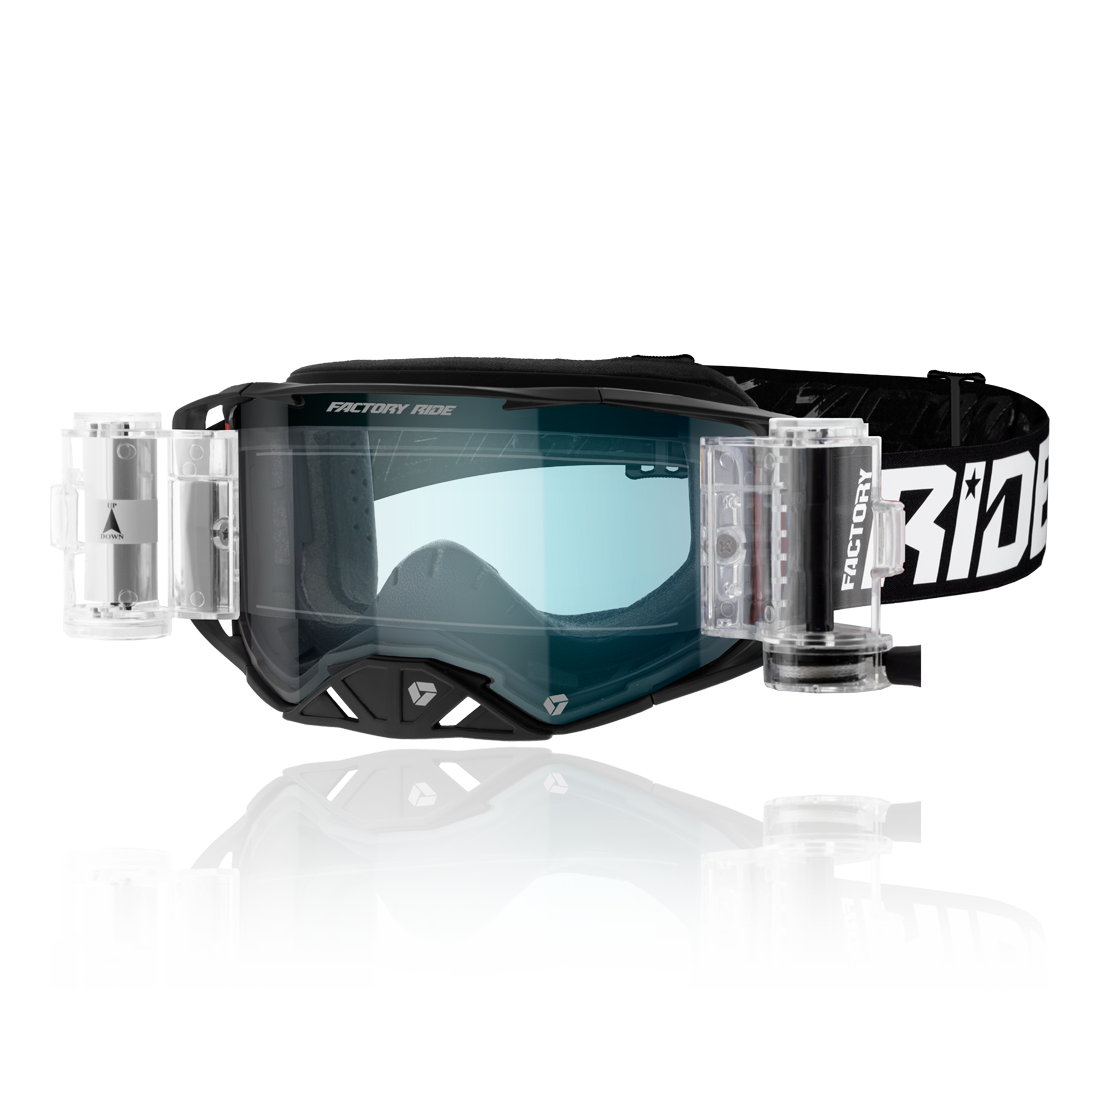 Factory Ride Roll-off Goggle Prime - Clear Lens